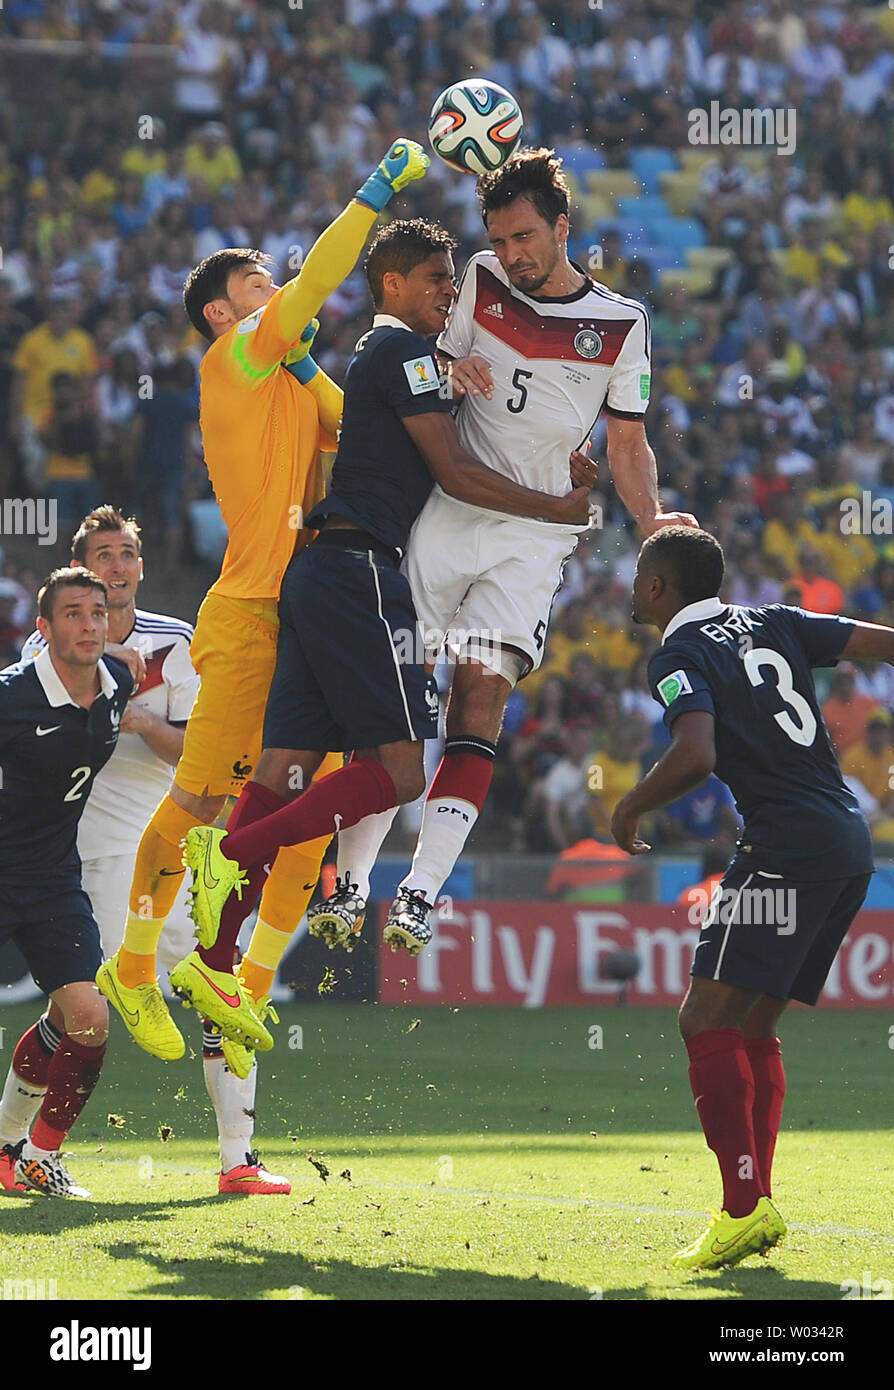 Hugo Lloris of France punches clear under pressure from Mats Hummels of Germany during the 2014 FIFA World Cup Quarter Final match at the Estadio do Maracana in Rio de Janeiro, Brazil on July 04, 2014. UPI/Chris Brunskill Stock Photo